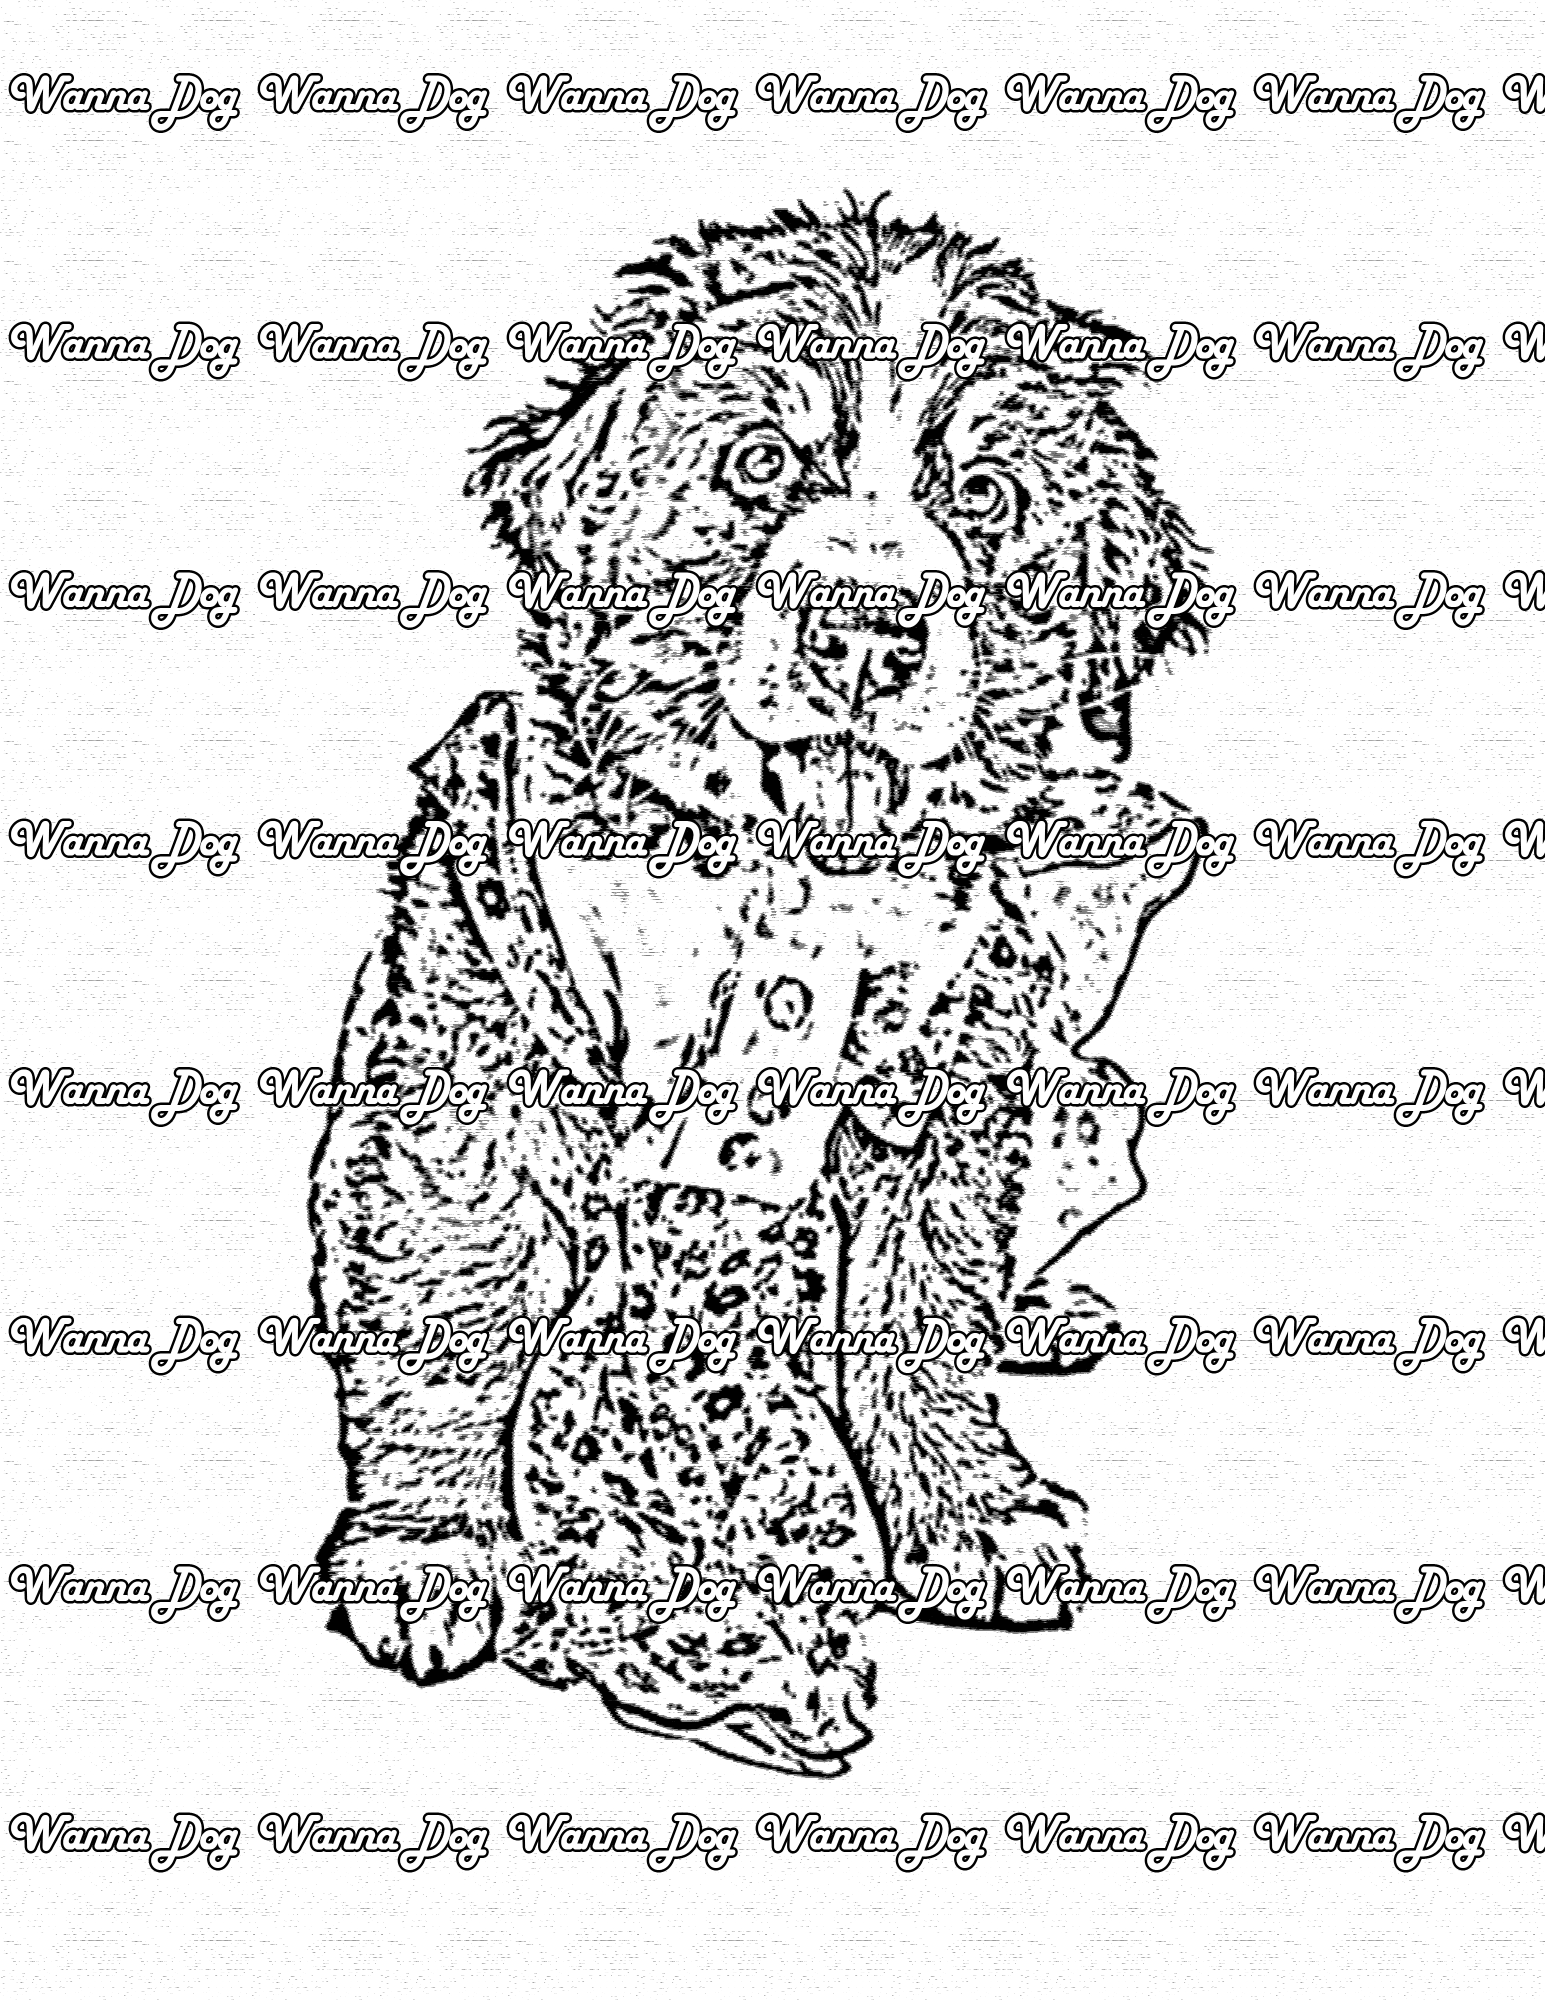 Bernese Mountain Dog Coloring Page of a Bernese Mountain Dog wearing a dress